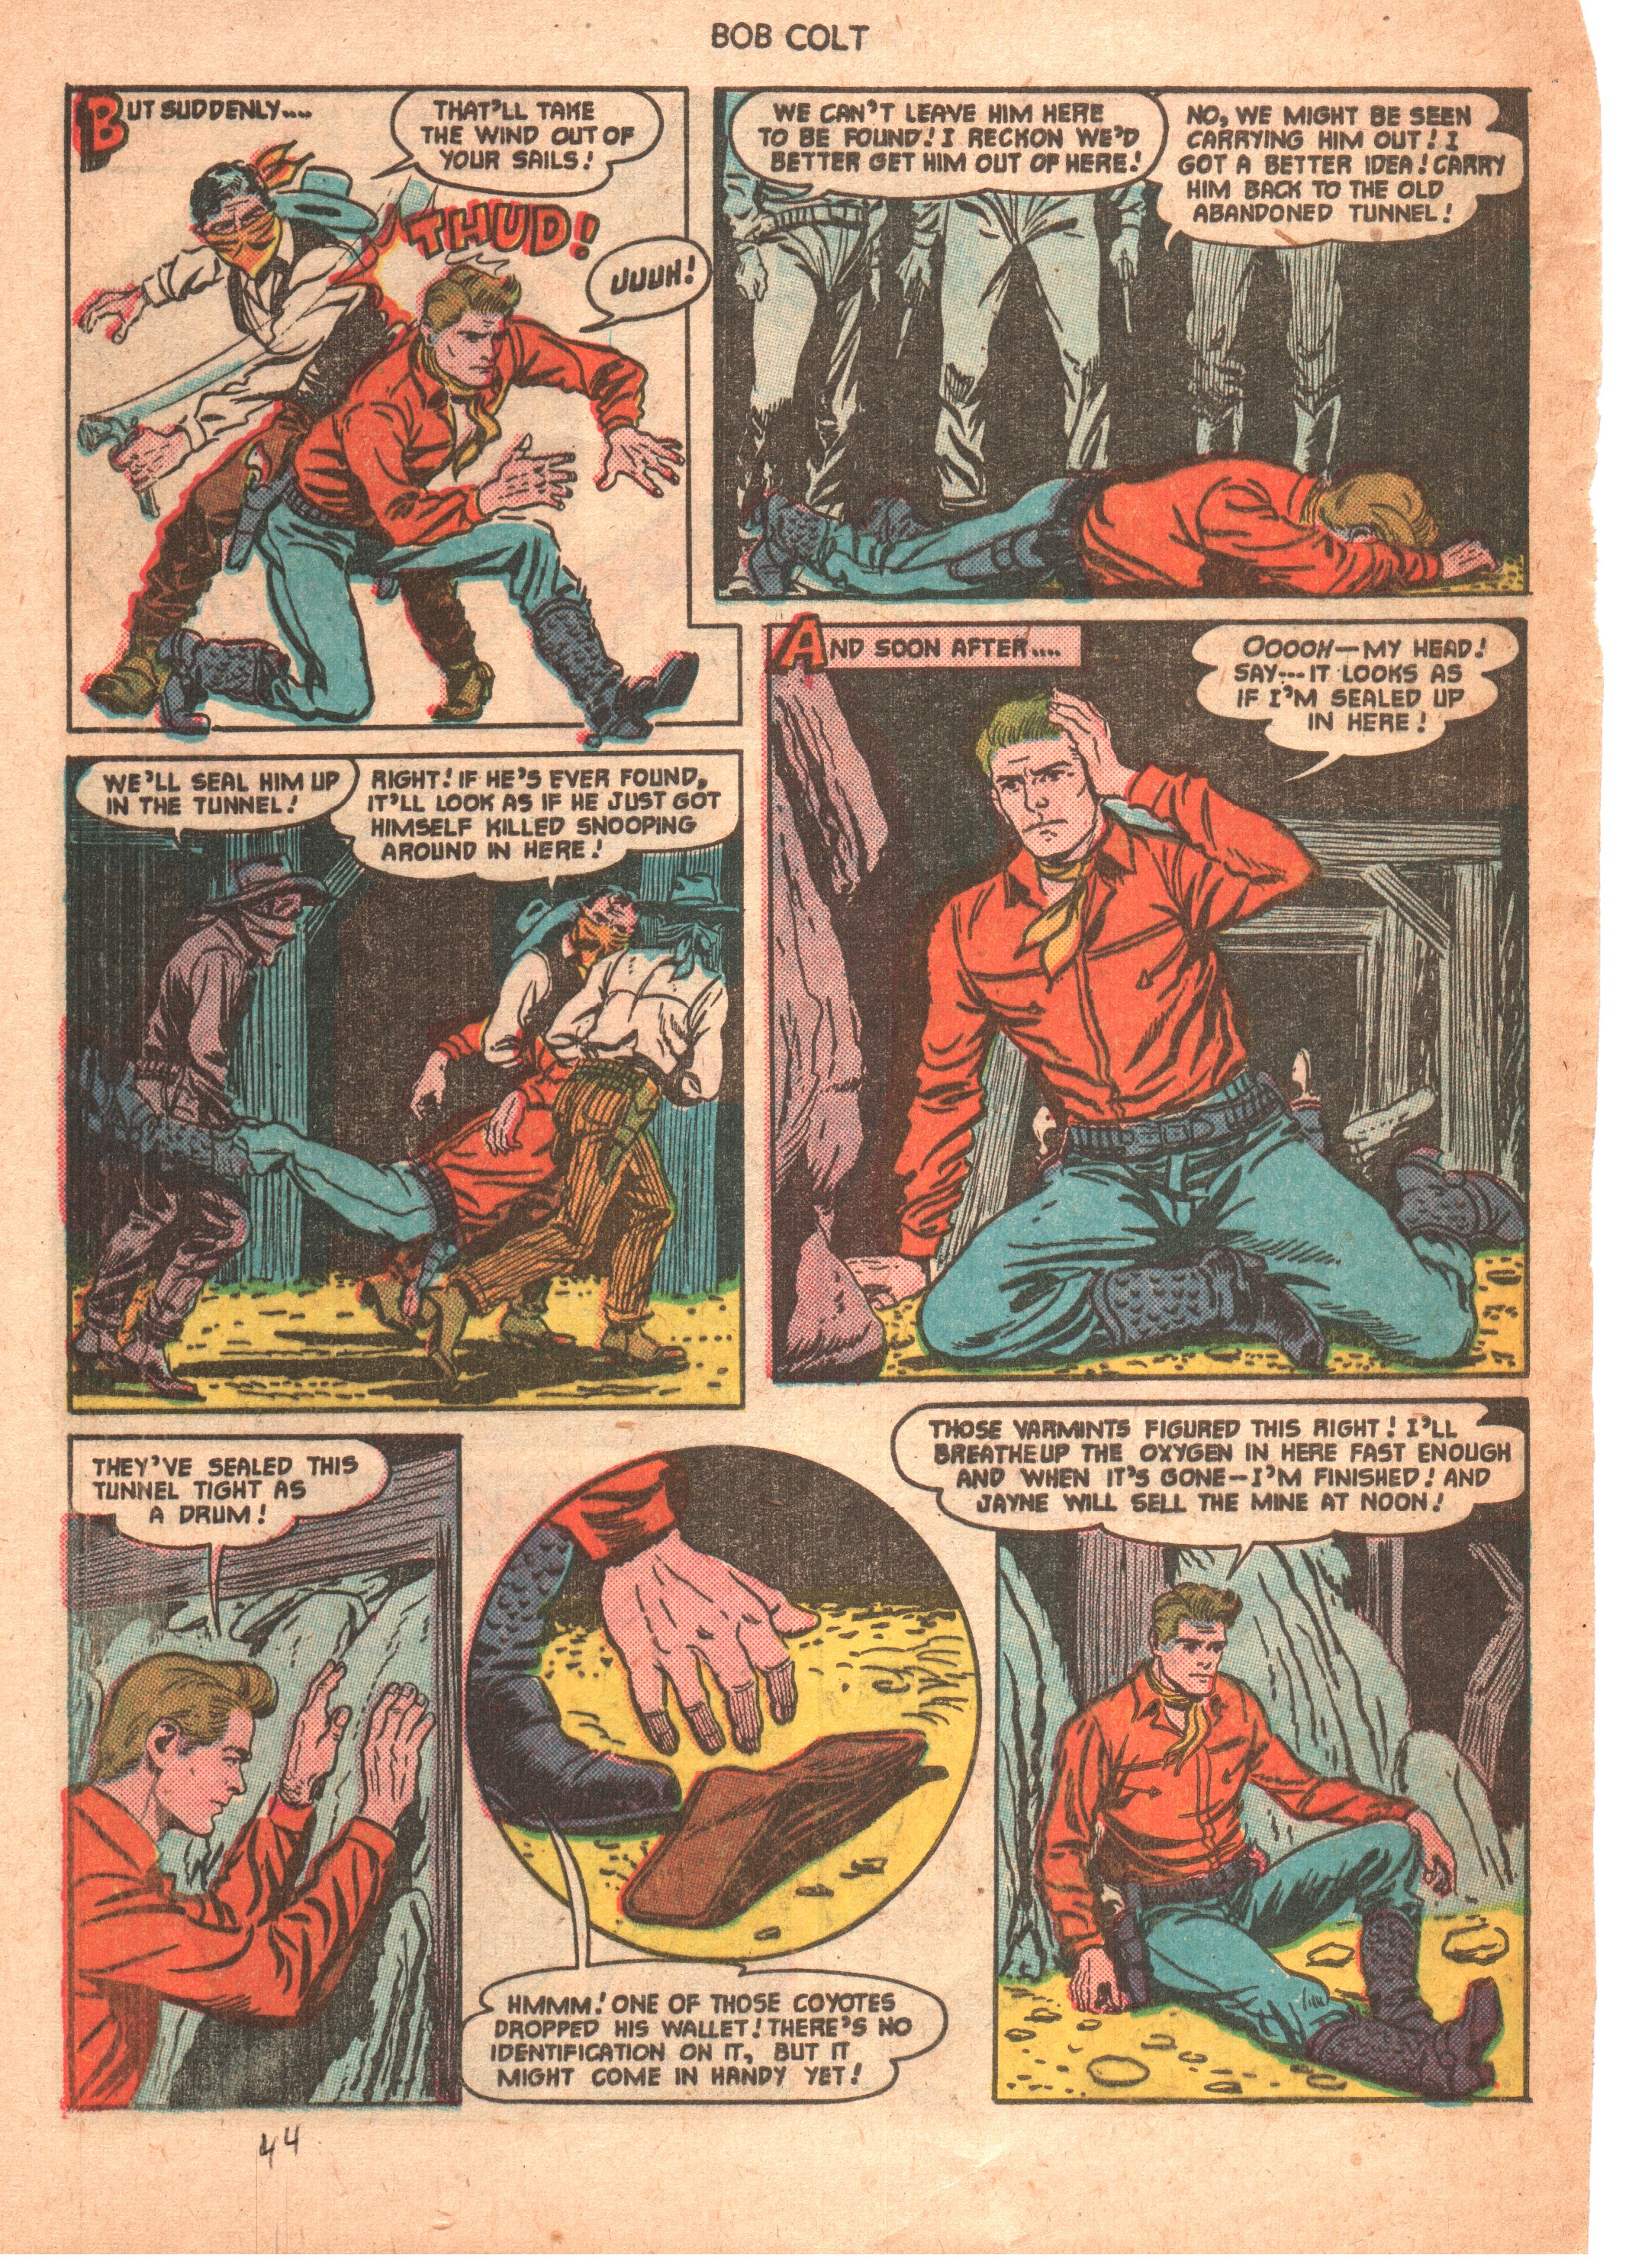 Read online Bob Colt Western comic -  Issue #6 - 11